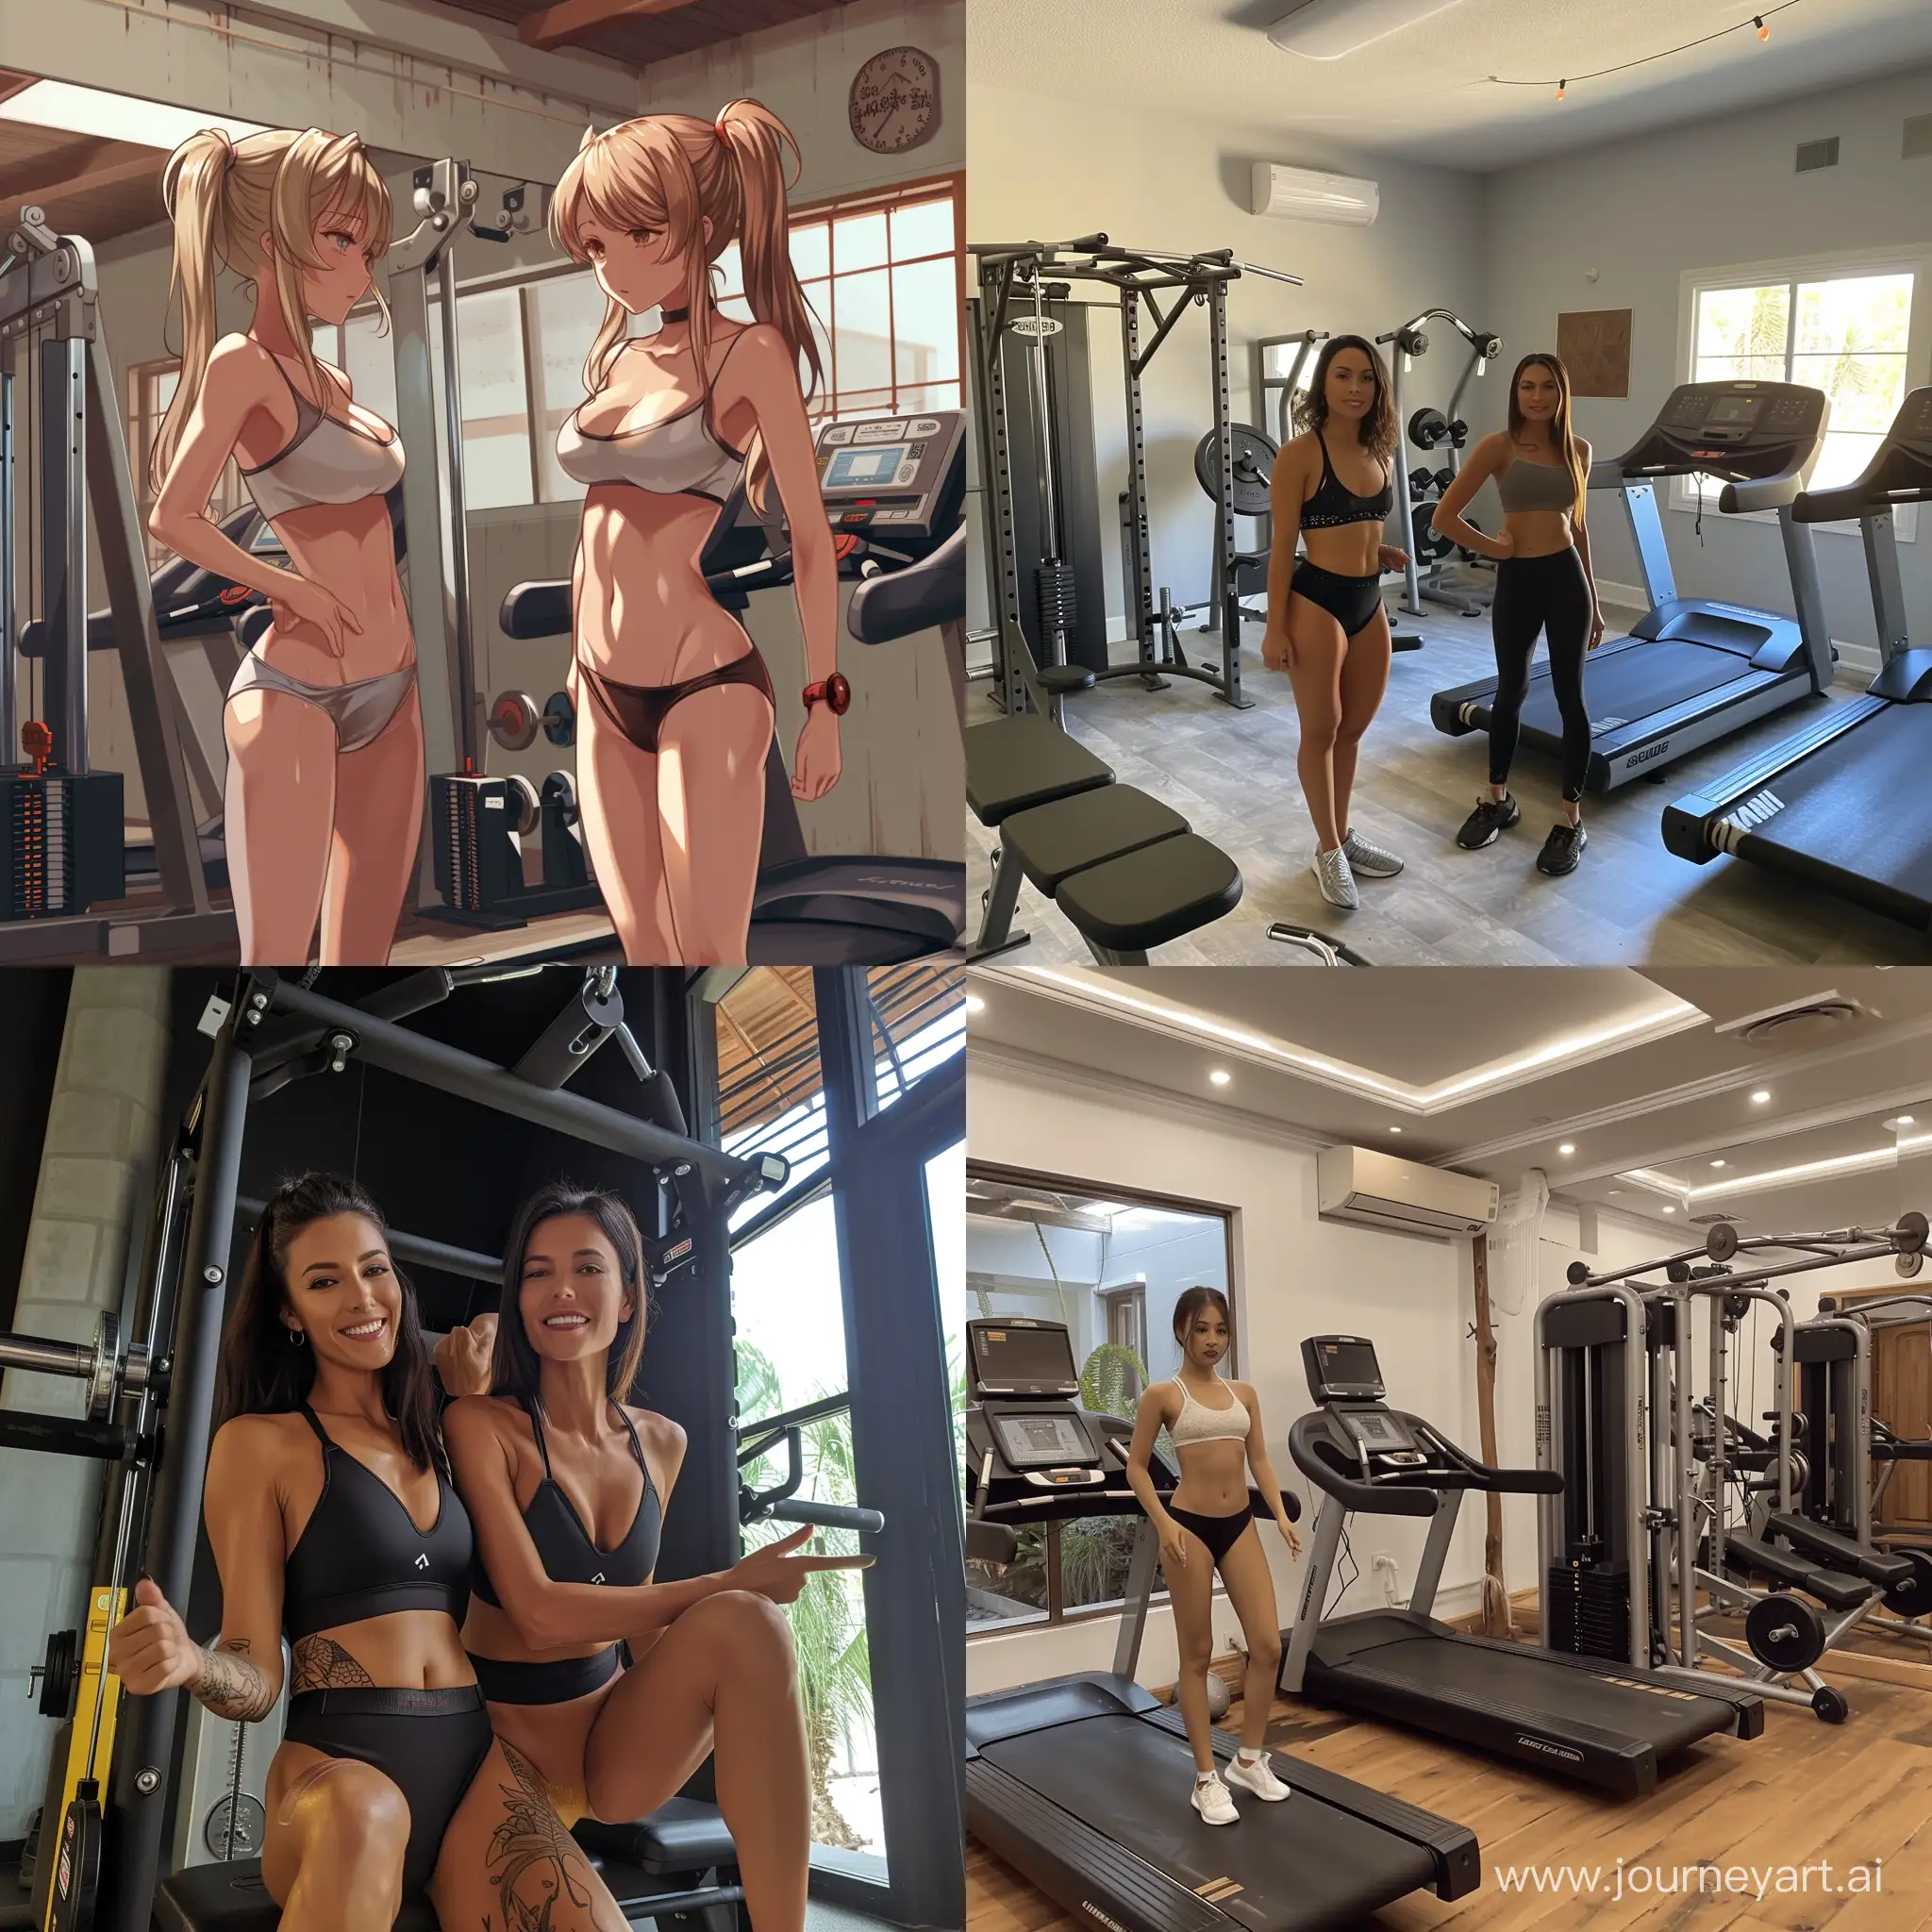 Two-Sexy-Women-Exercising-in-a-Cozy-Gym-Setting